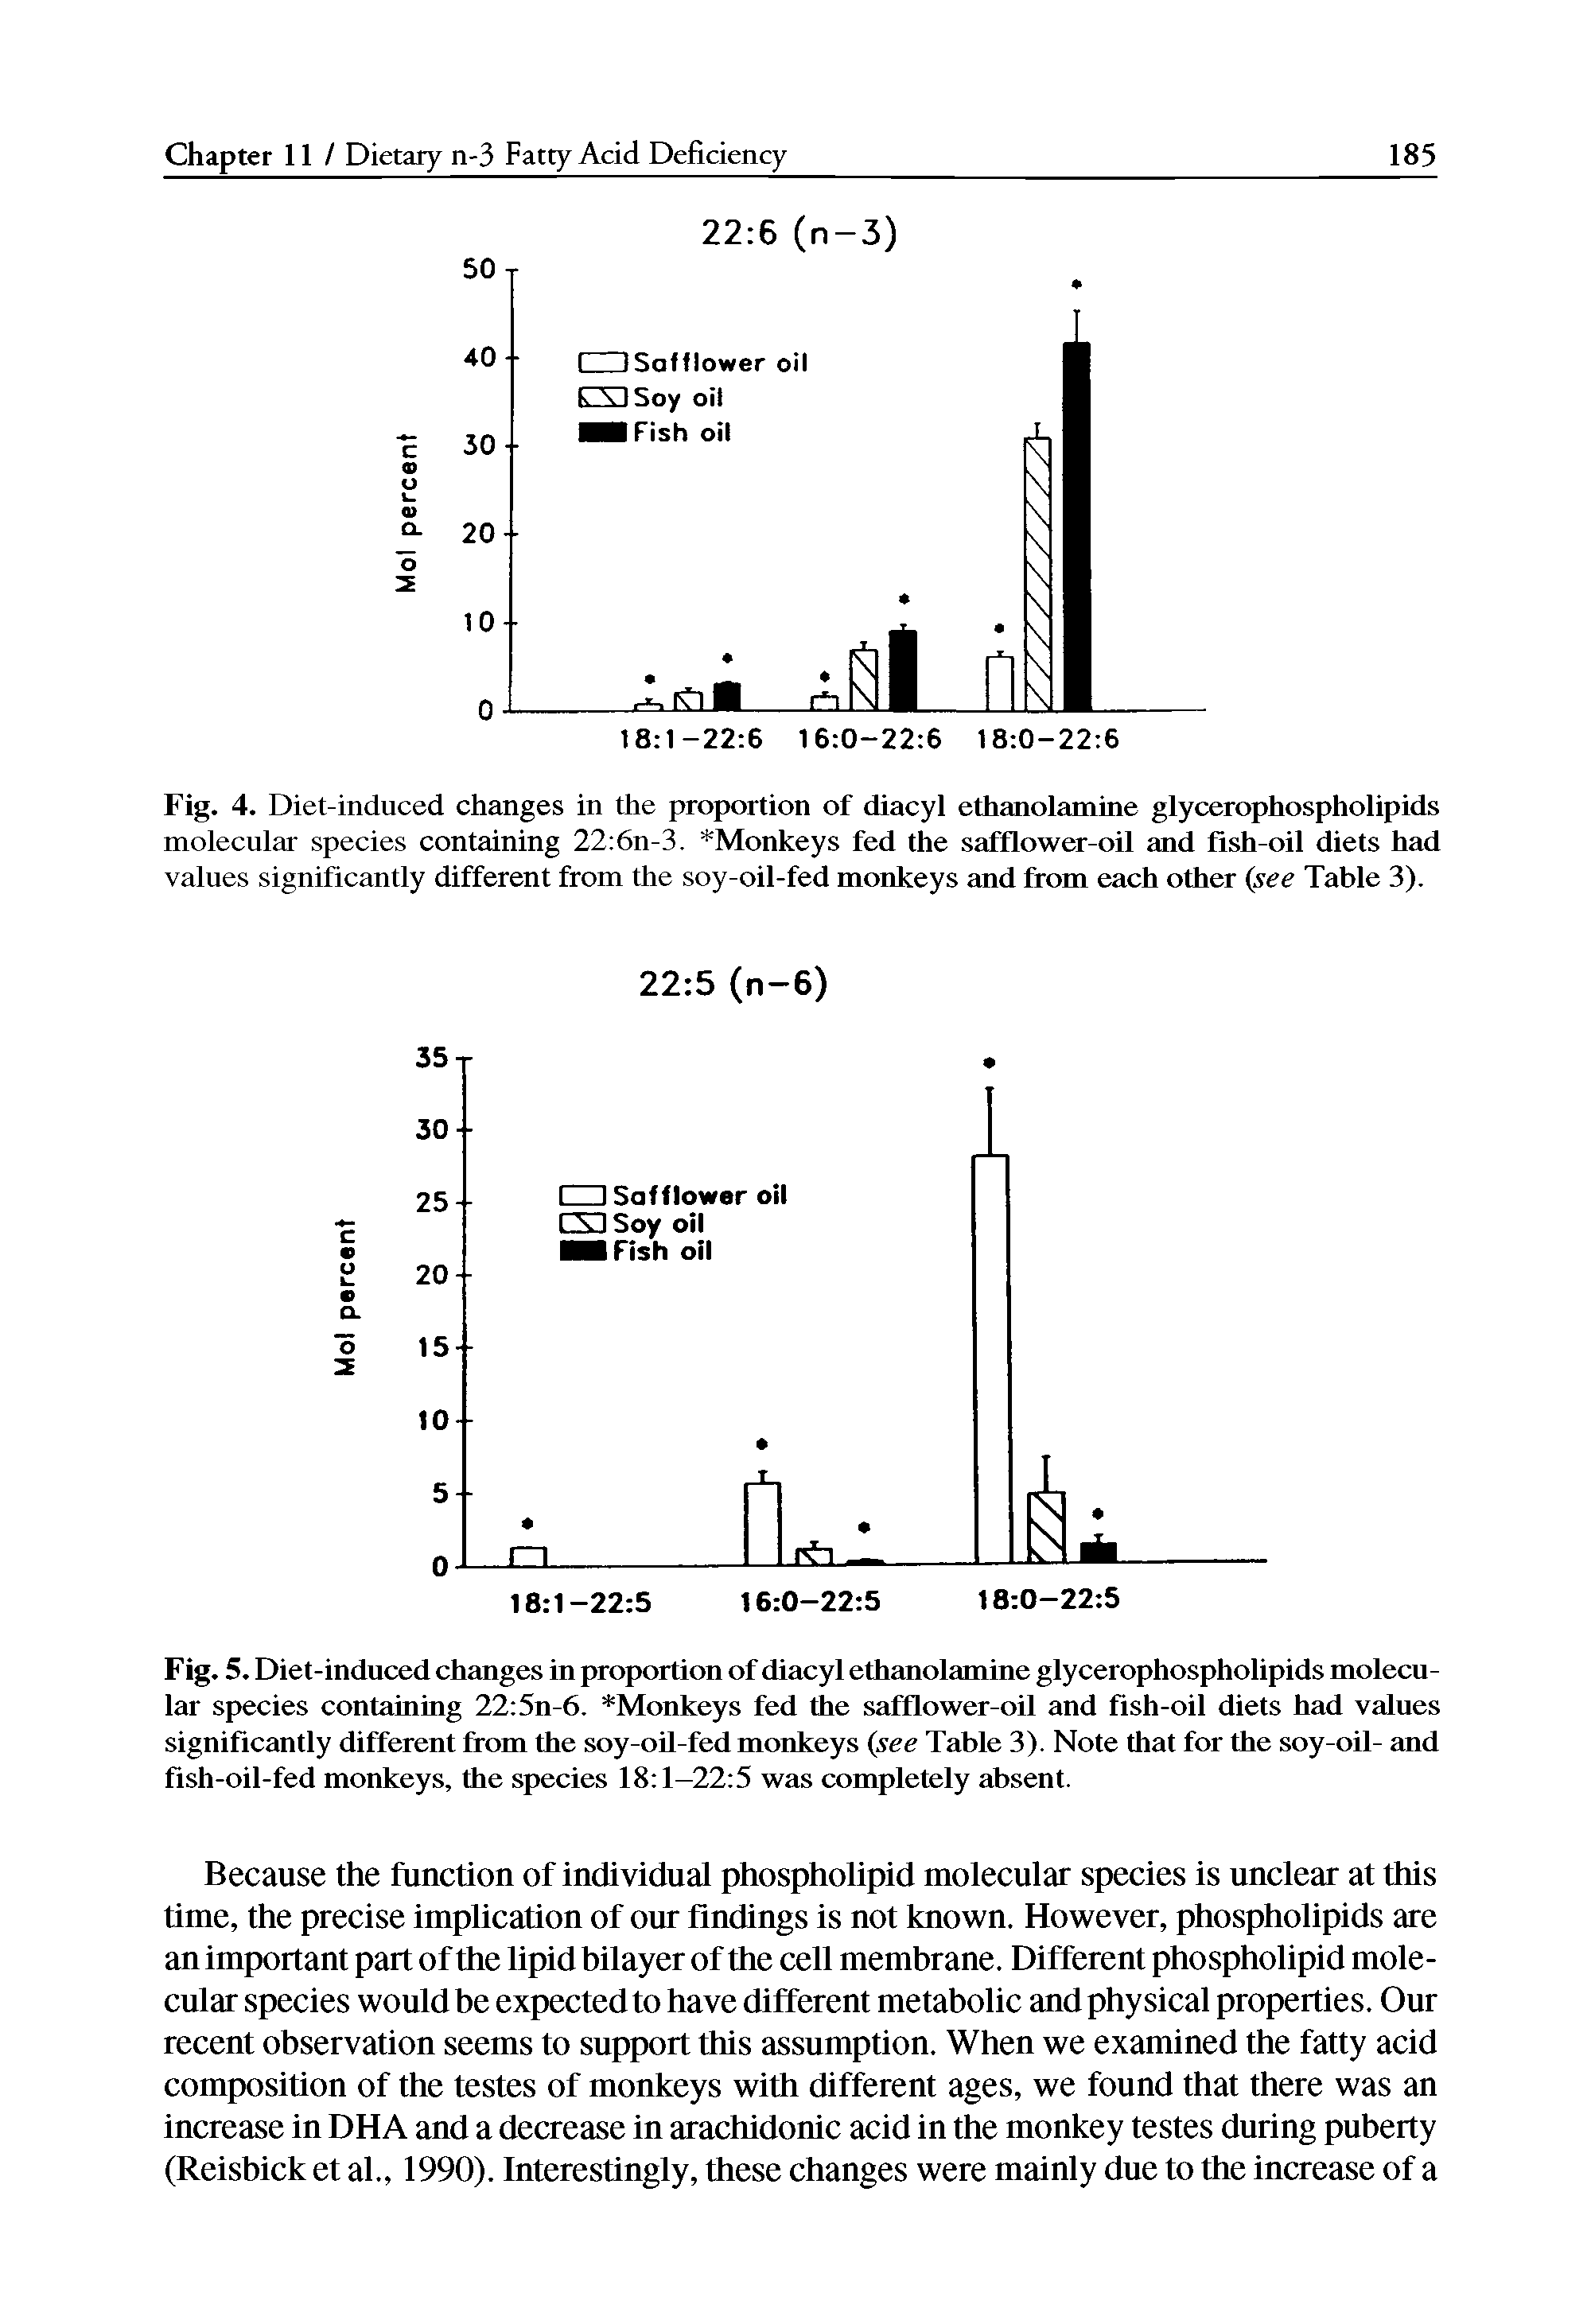 Fig. 4. Diet-induced changes in the proportion of diacyl ethanolamine glycerophospholipids molecular species containing 22 6n-3. Monkeys fed the safflower-oil and fish-oil diets had values significantly different from the soy-oil-fed monkeys and from each other see Table 3).